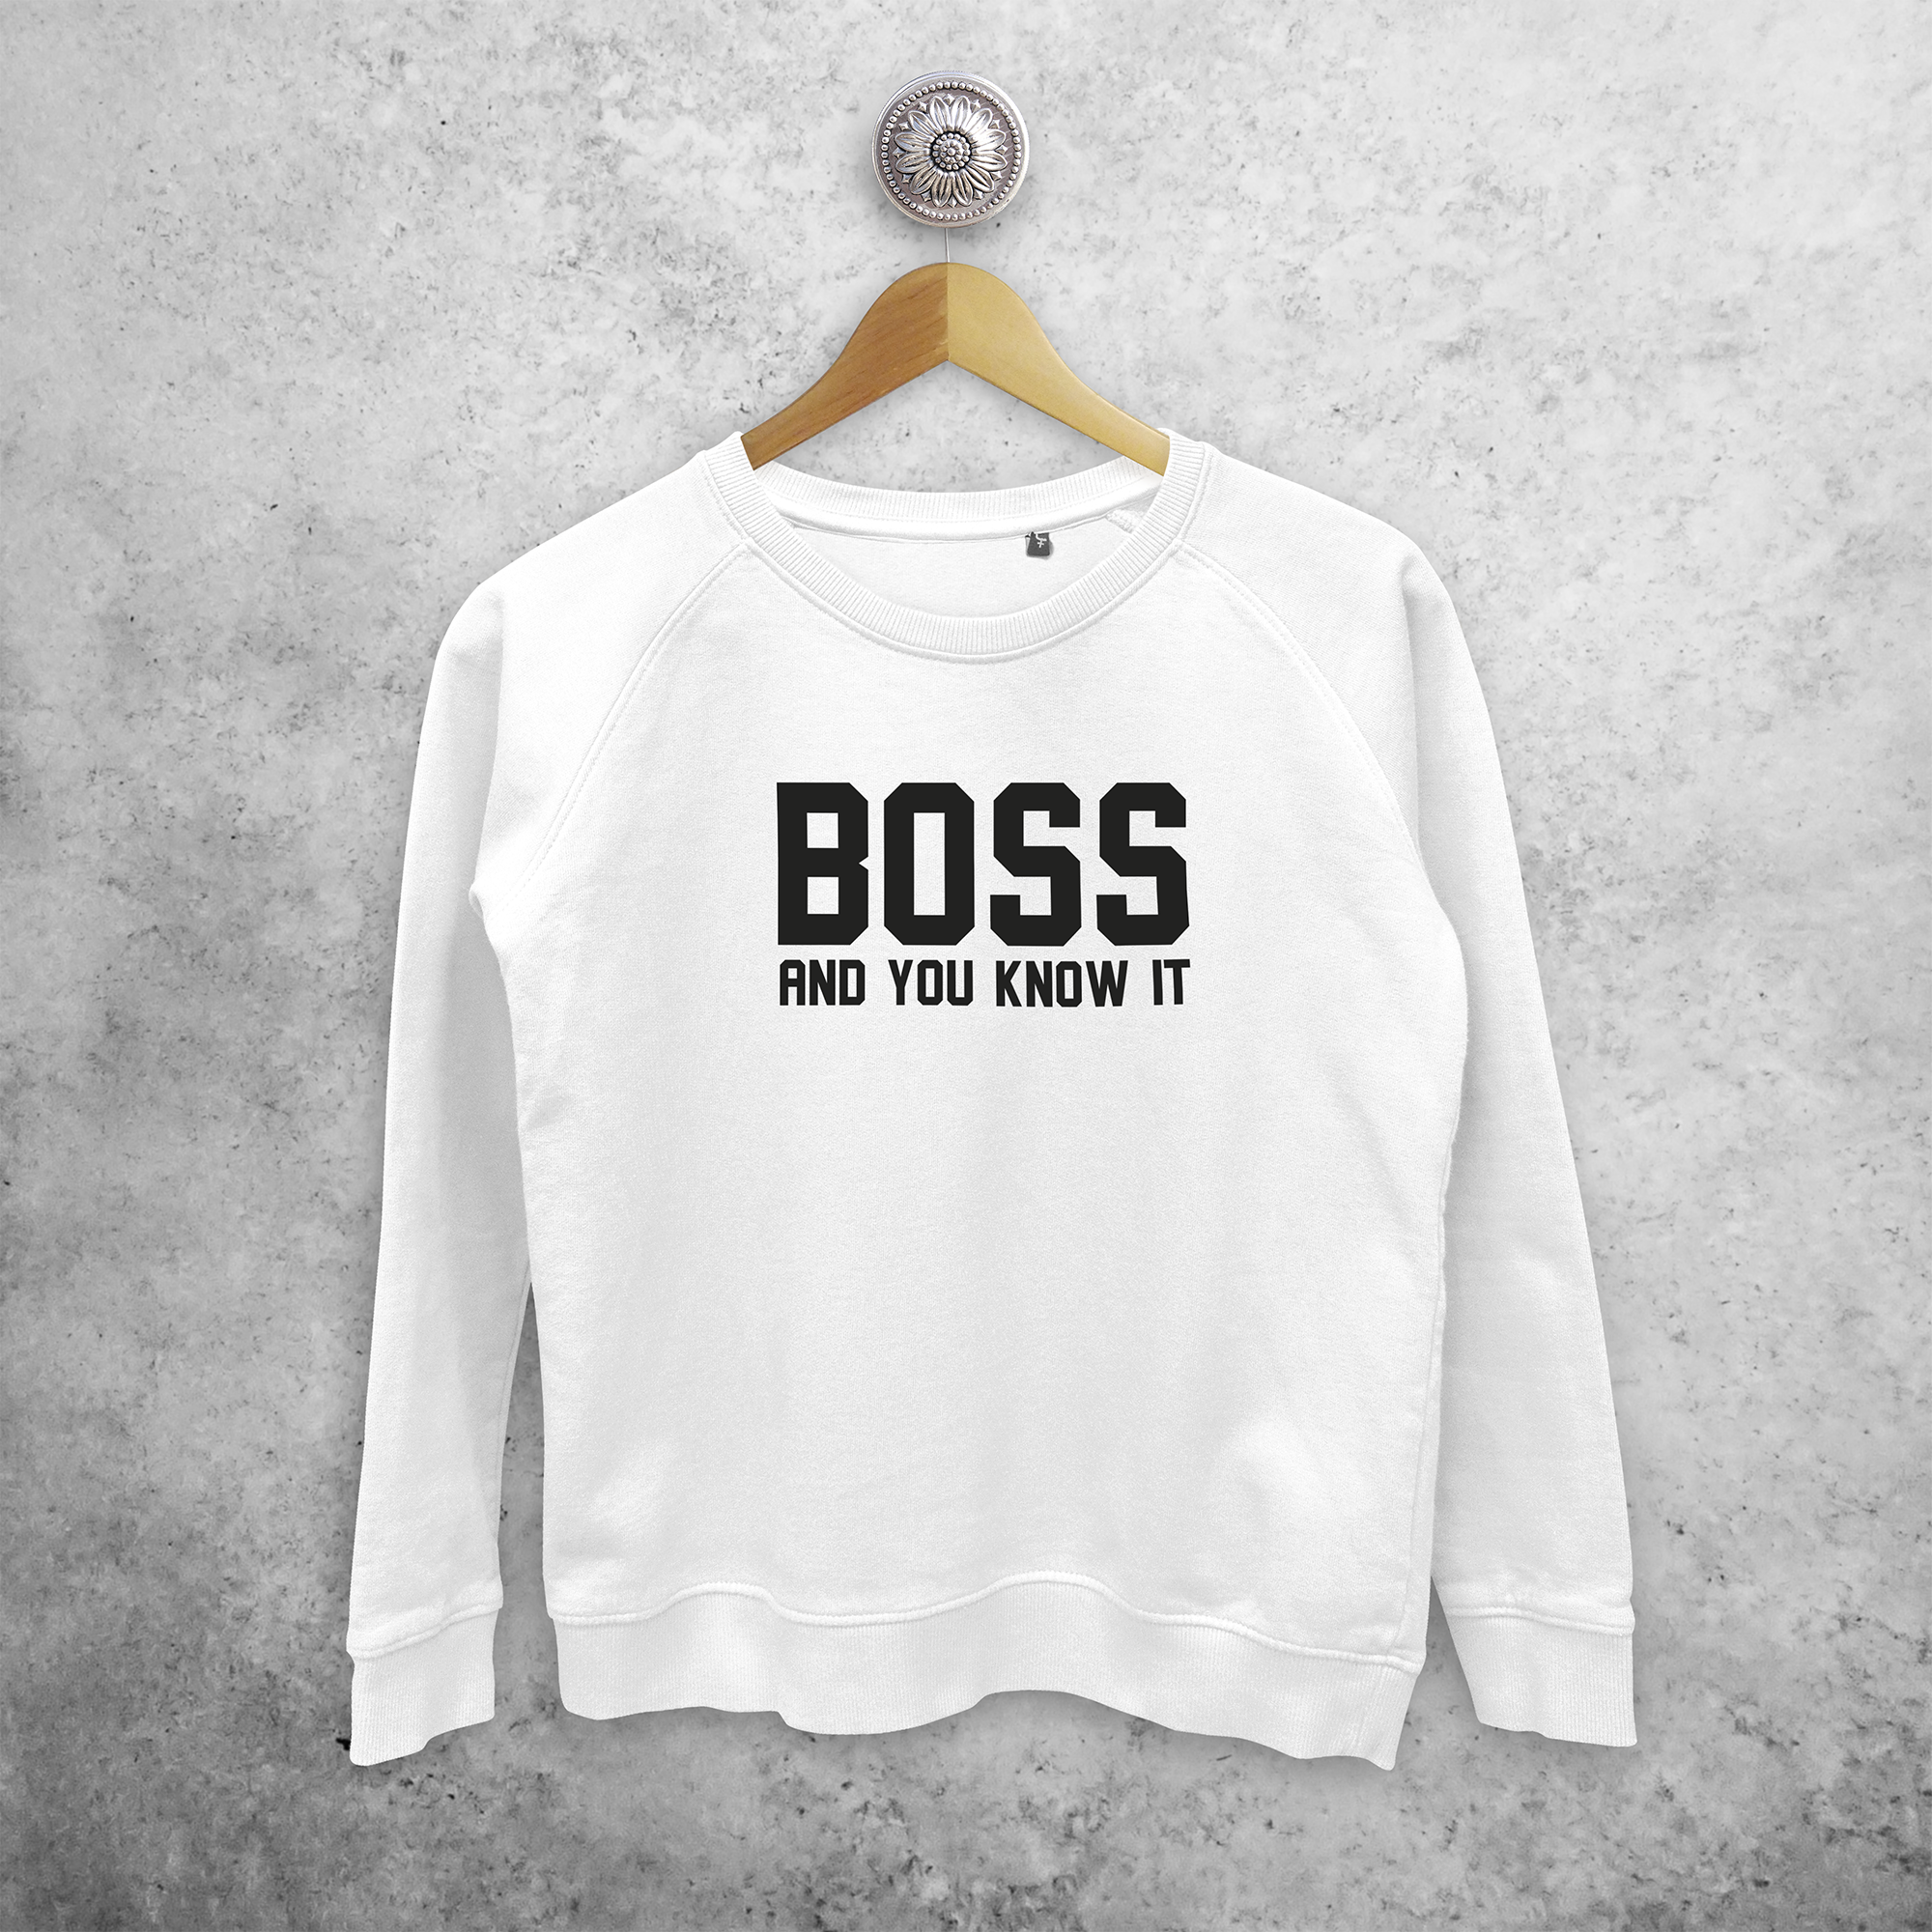 'Boss and you know it' sweater